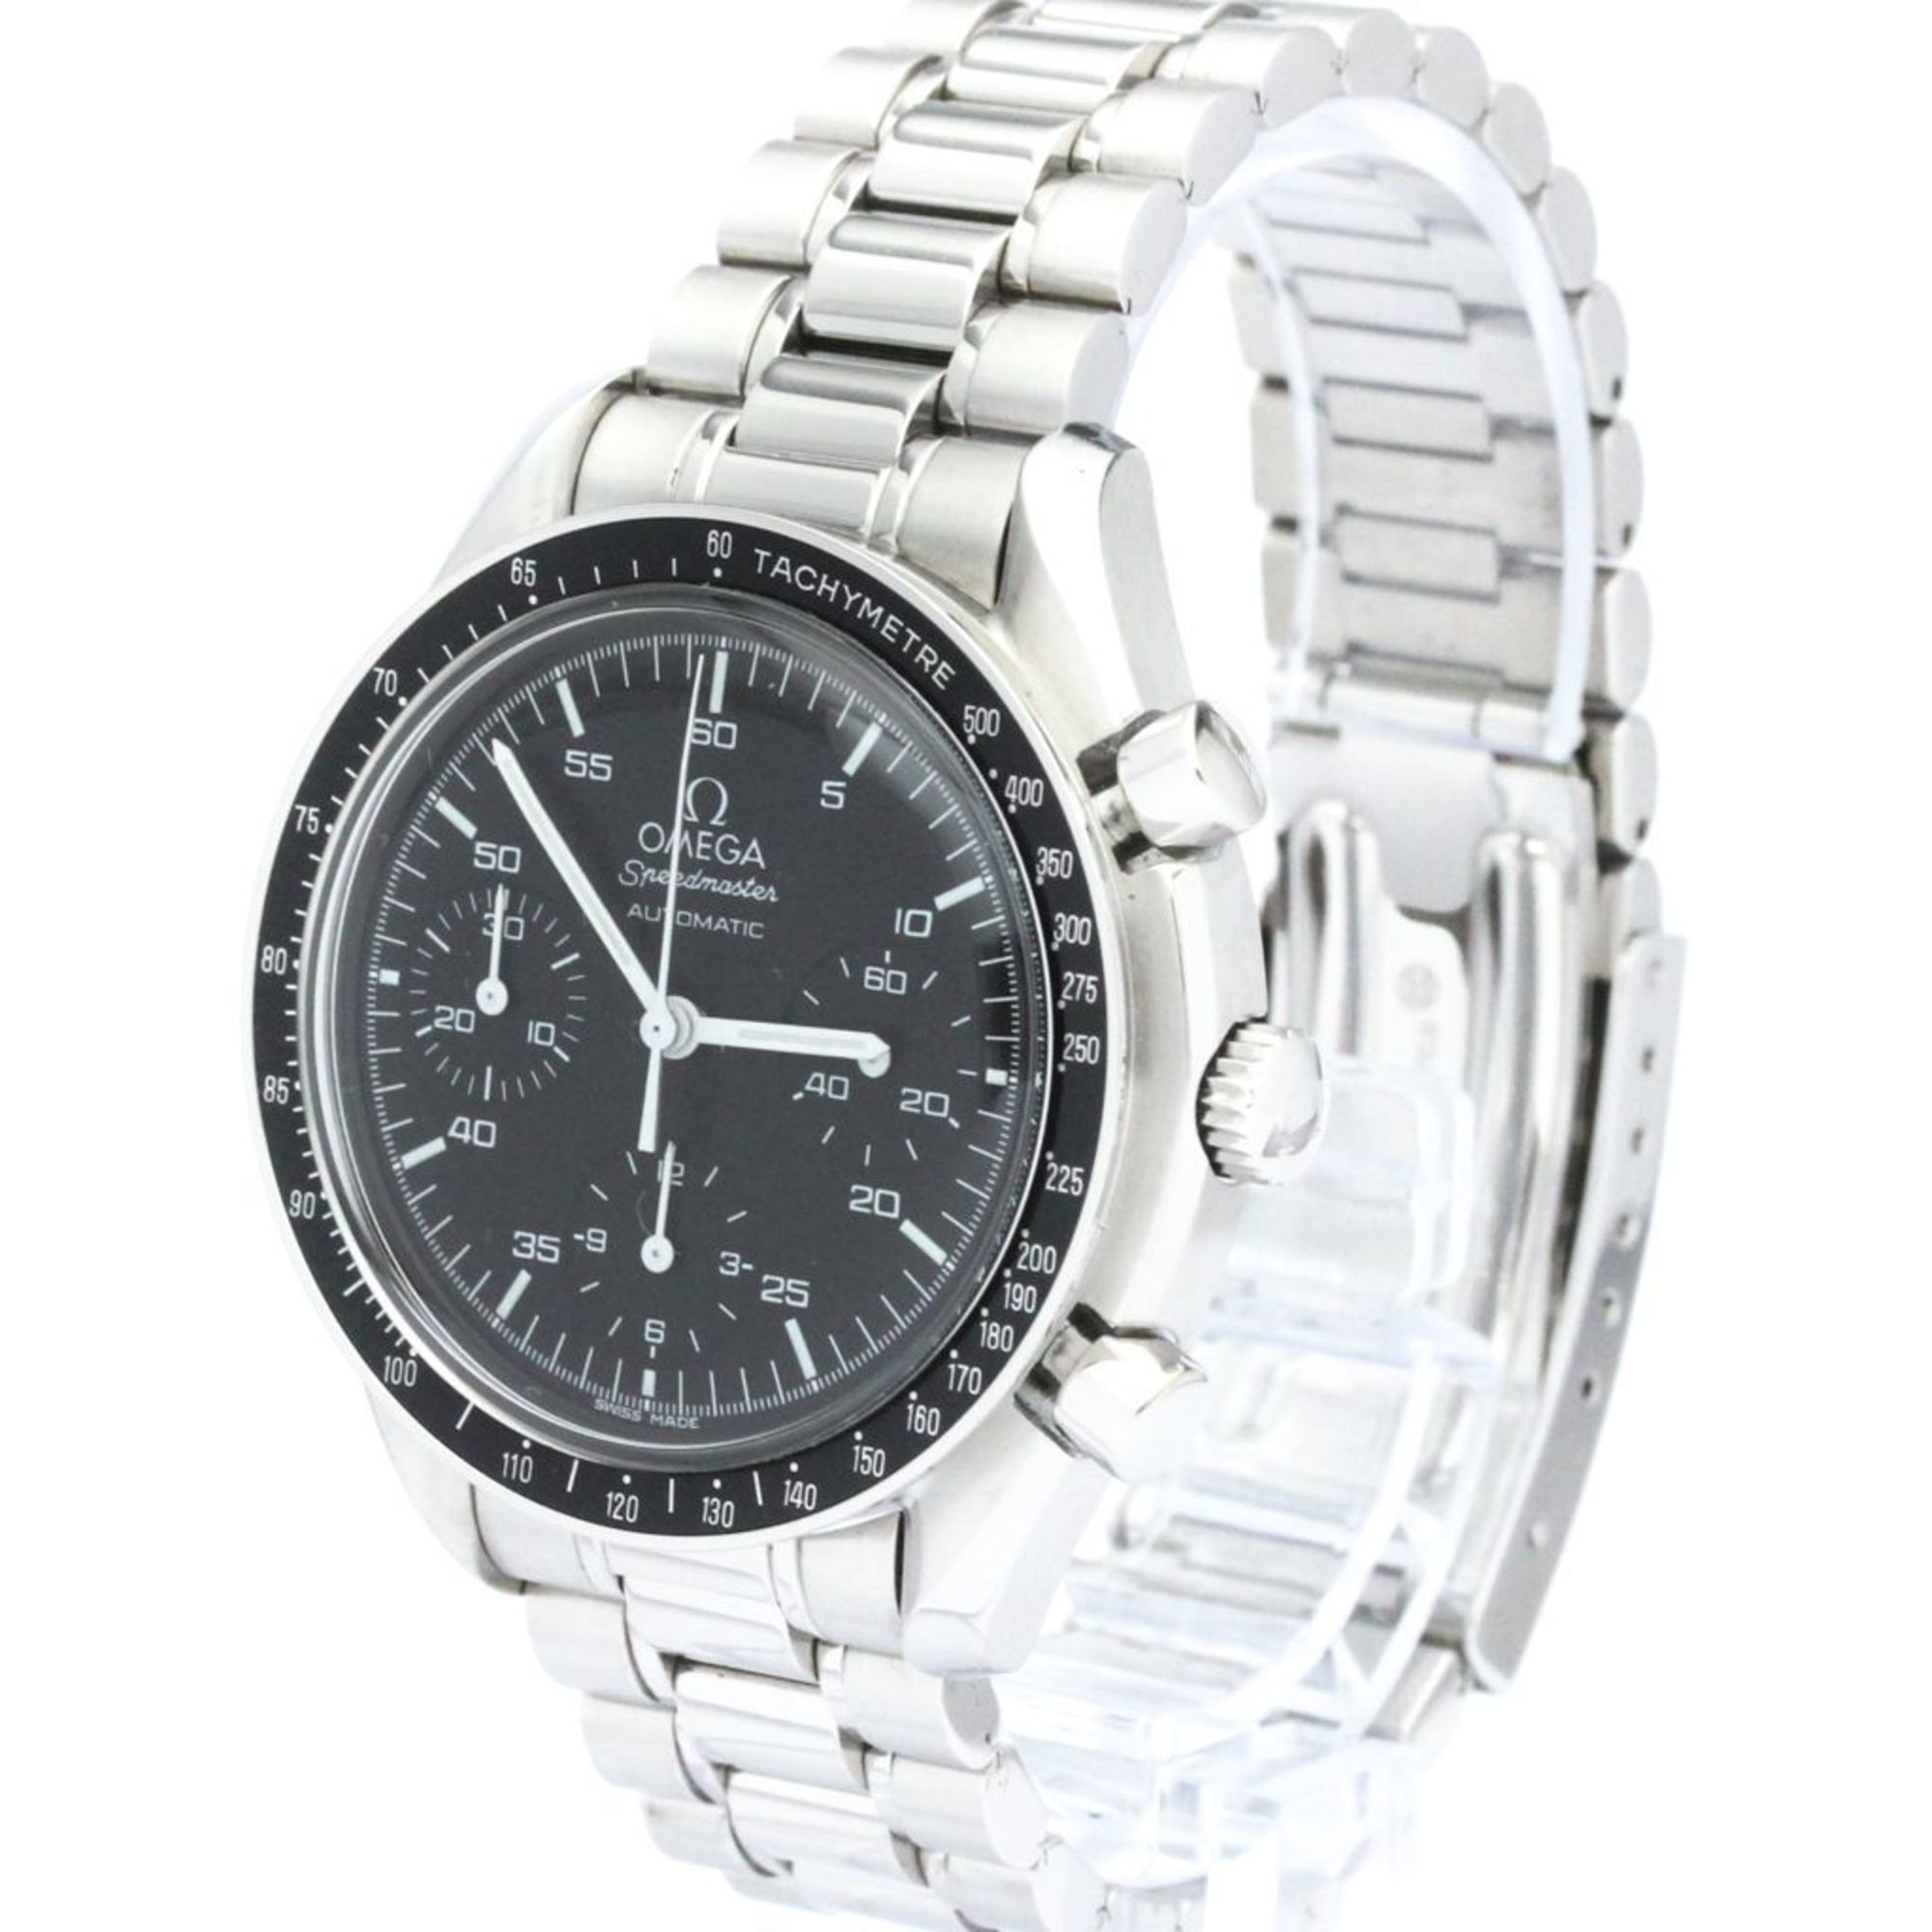 Polished OMEGA Speedmaster Automatic Steel Mens Watch 3510.50 BF564383